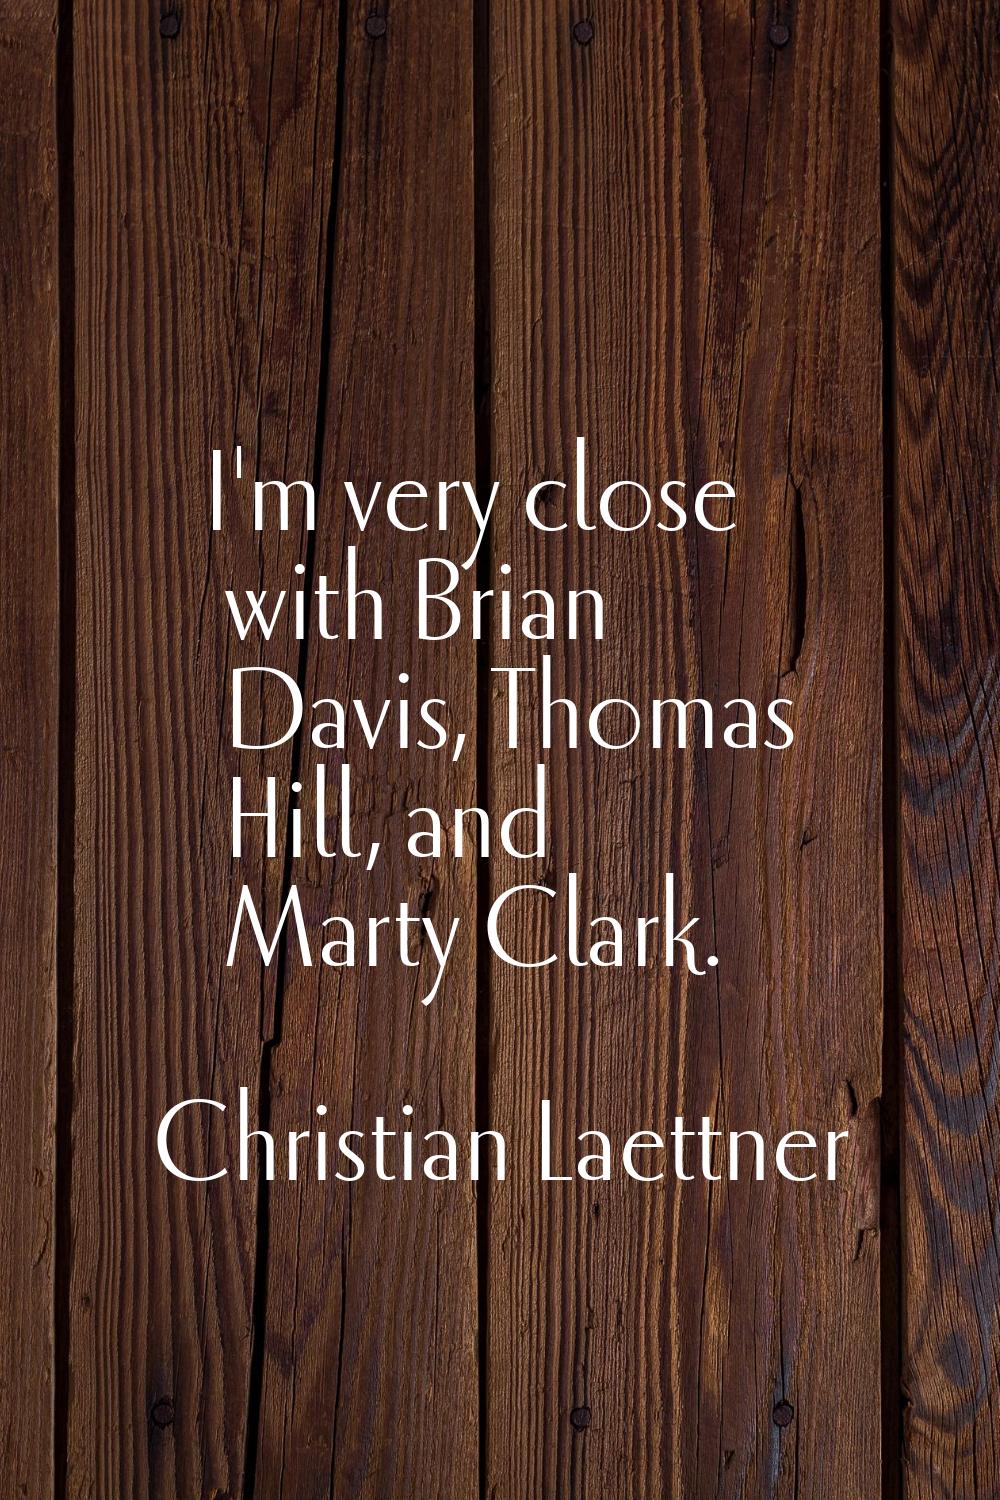 I'm very close with Brian Davis, Thomas Hill, and Marty Clark.